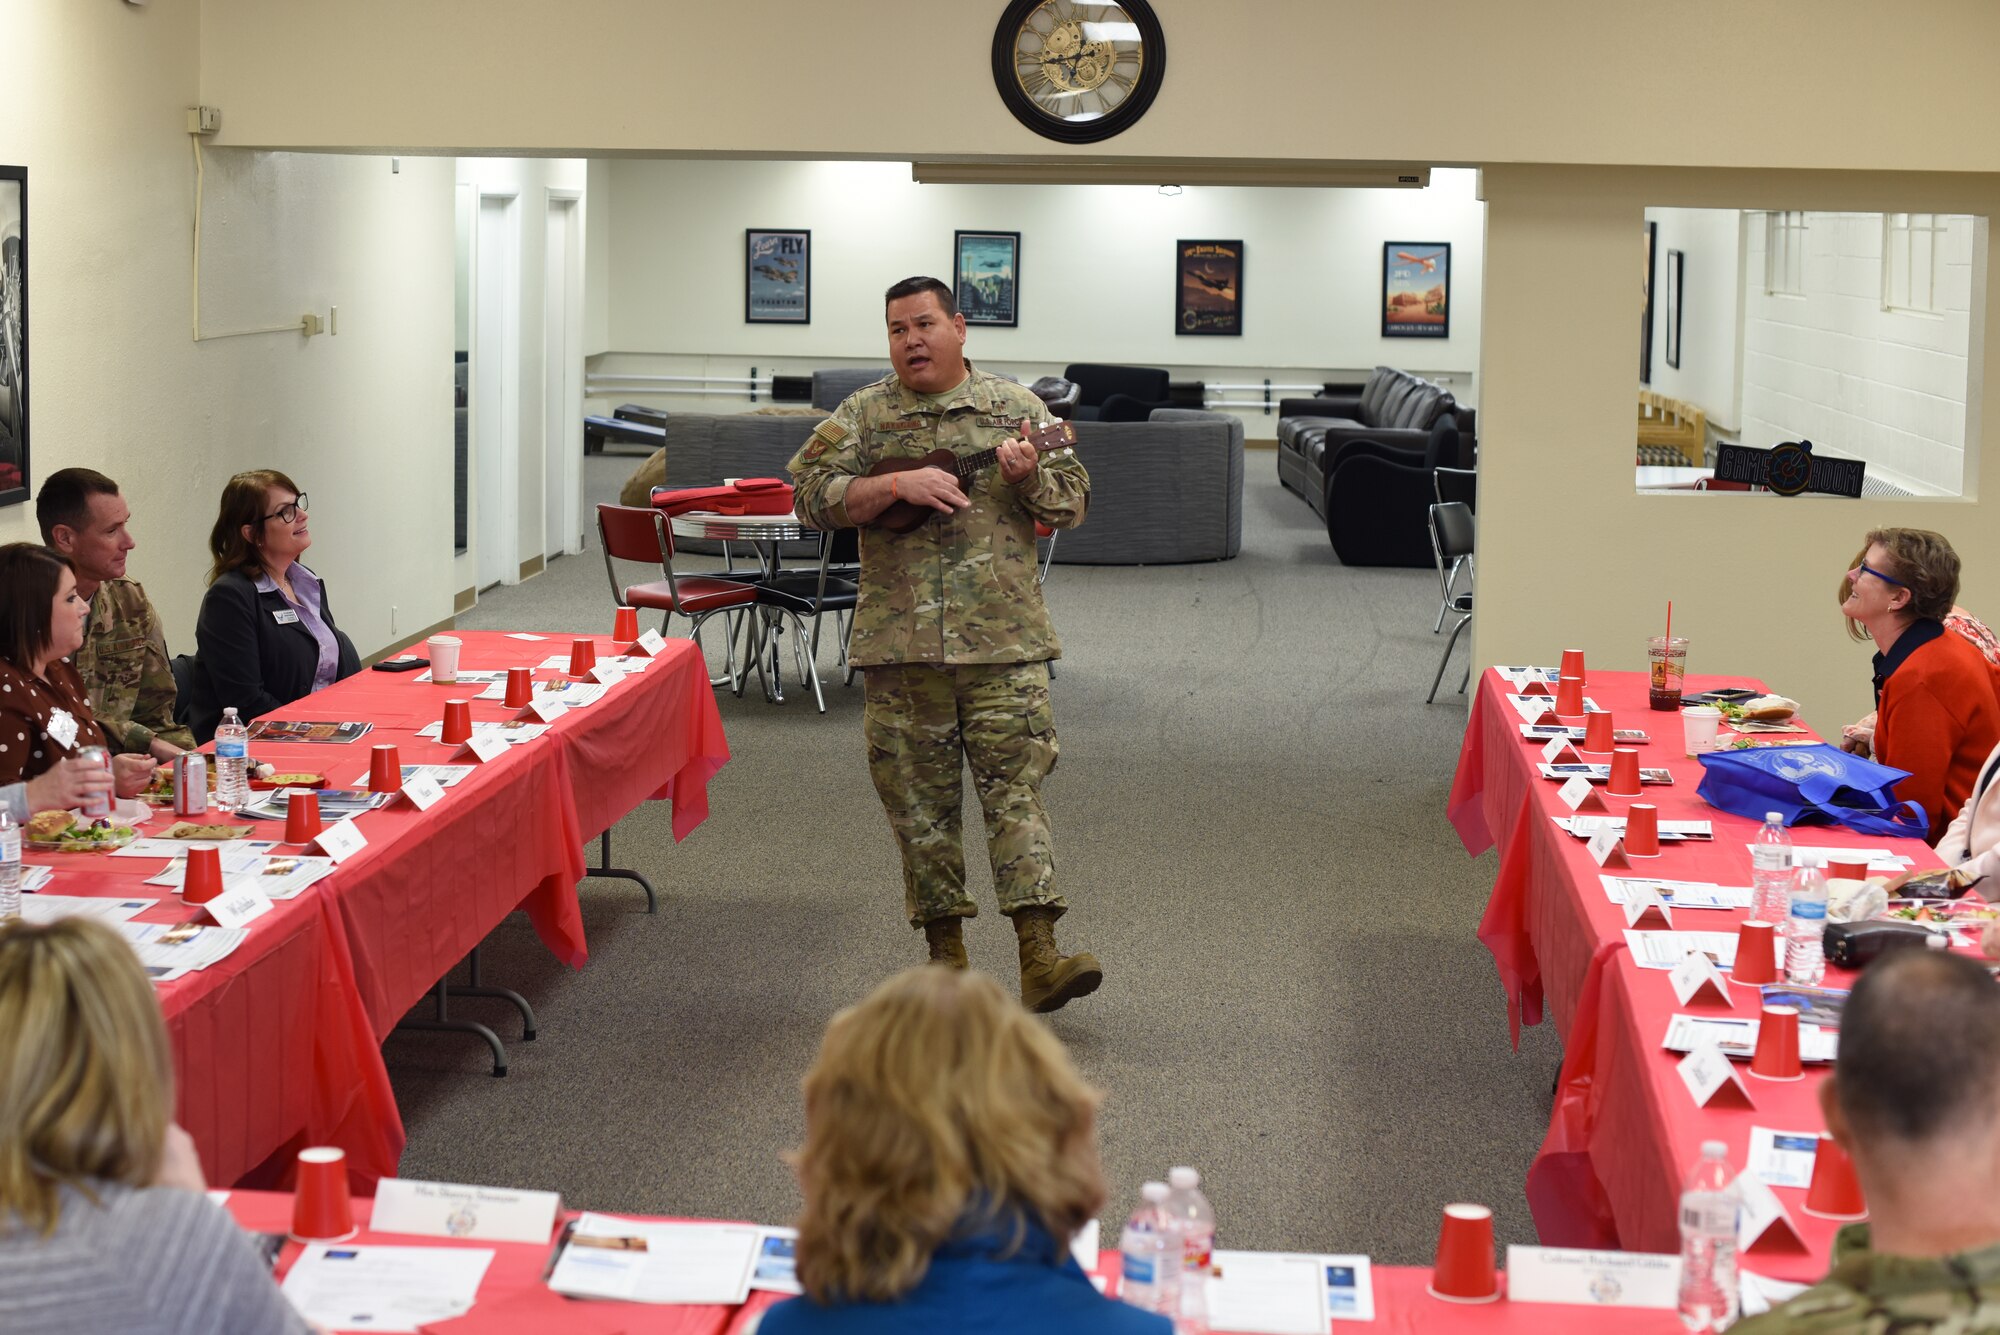 U.S. Air Force Chap. (Maj.) Craig Nakagawa, 377th Air Base Wing deputy wing chaplain, plays the ukulele at a senior spouse immersion tour at Kirtland Air Force Base, N.M., Jan. 15, 2019. The tour included visits to key areas around Kirtland, with the intent of familiarizing spouses on the base to better equip them in assisting Airmen and their families. (U.S. Air Force photo by Senior Airman Eli Chevalier)